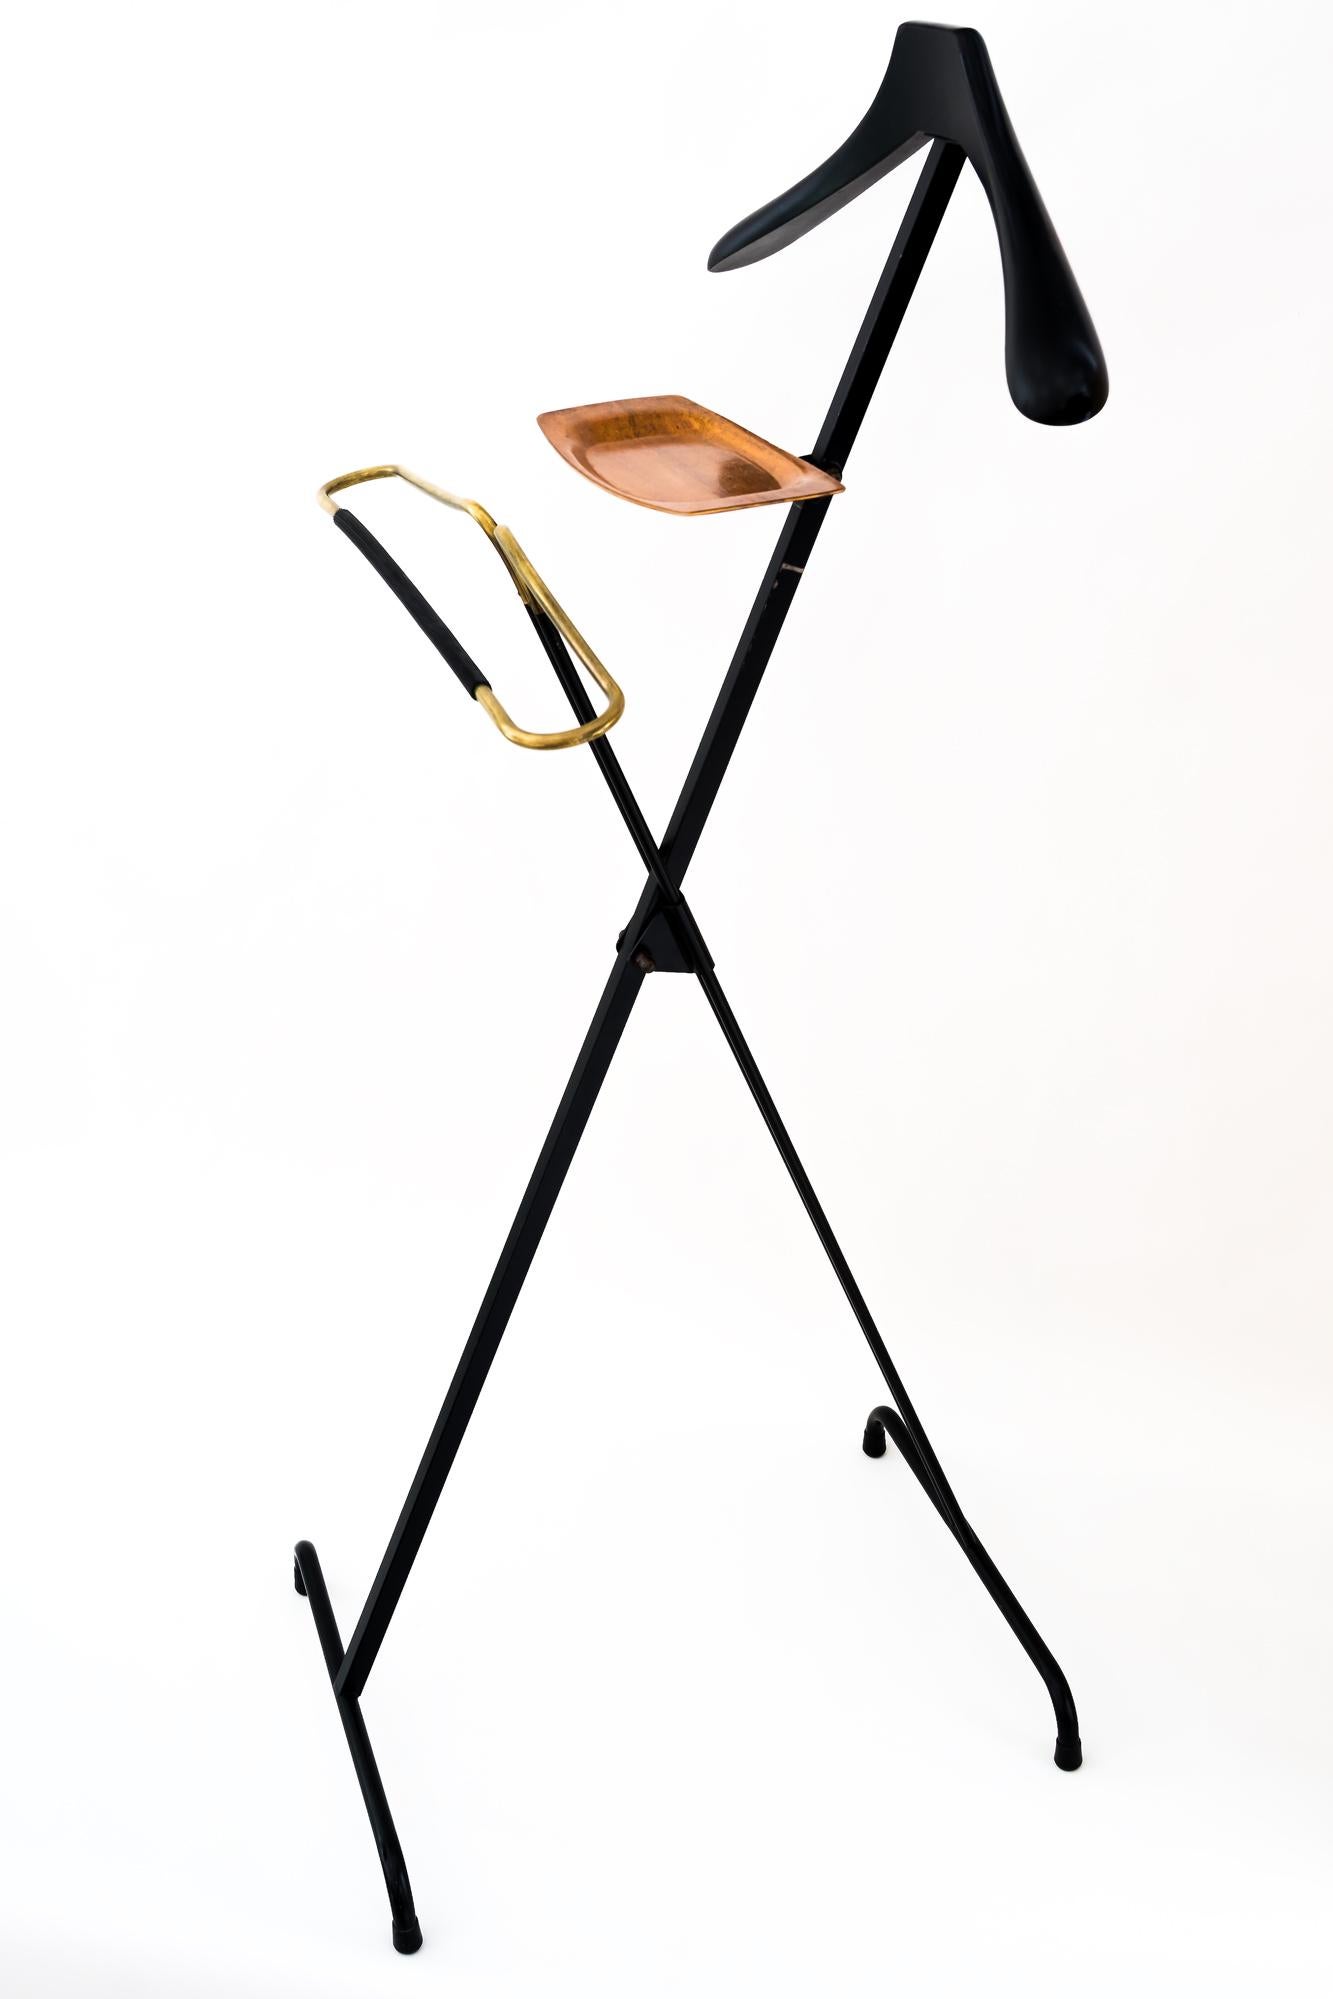 Blackened Union Champion Coat Rack and Valet, 1960s For Sale